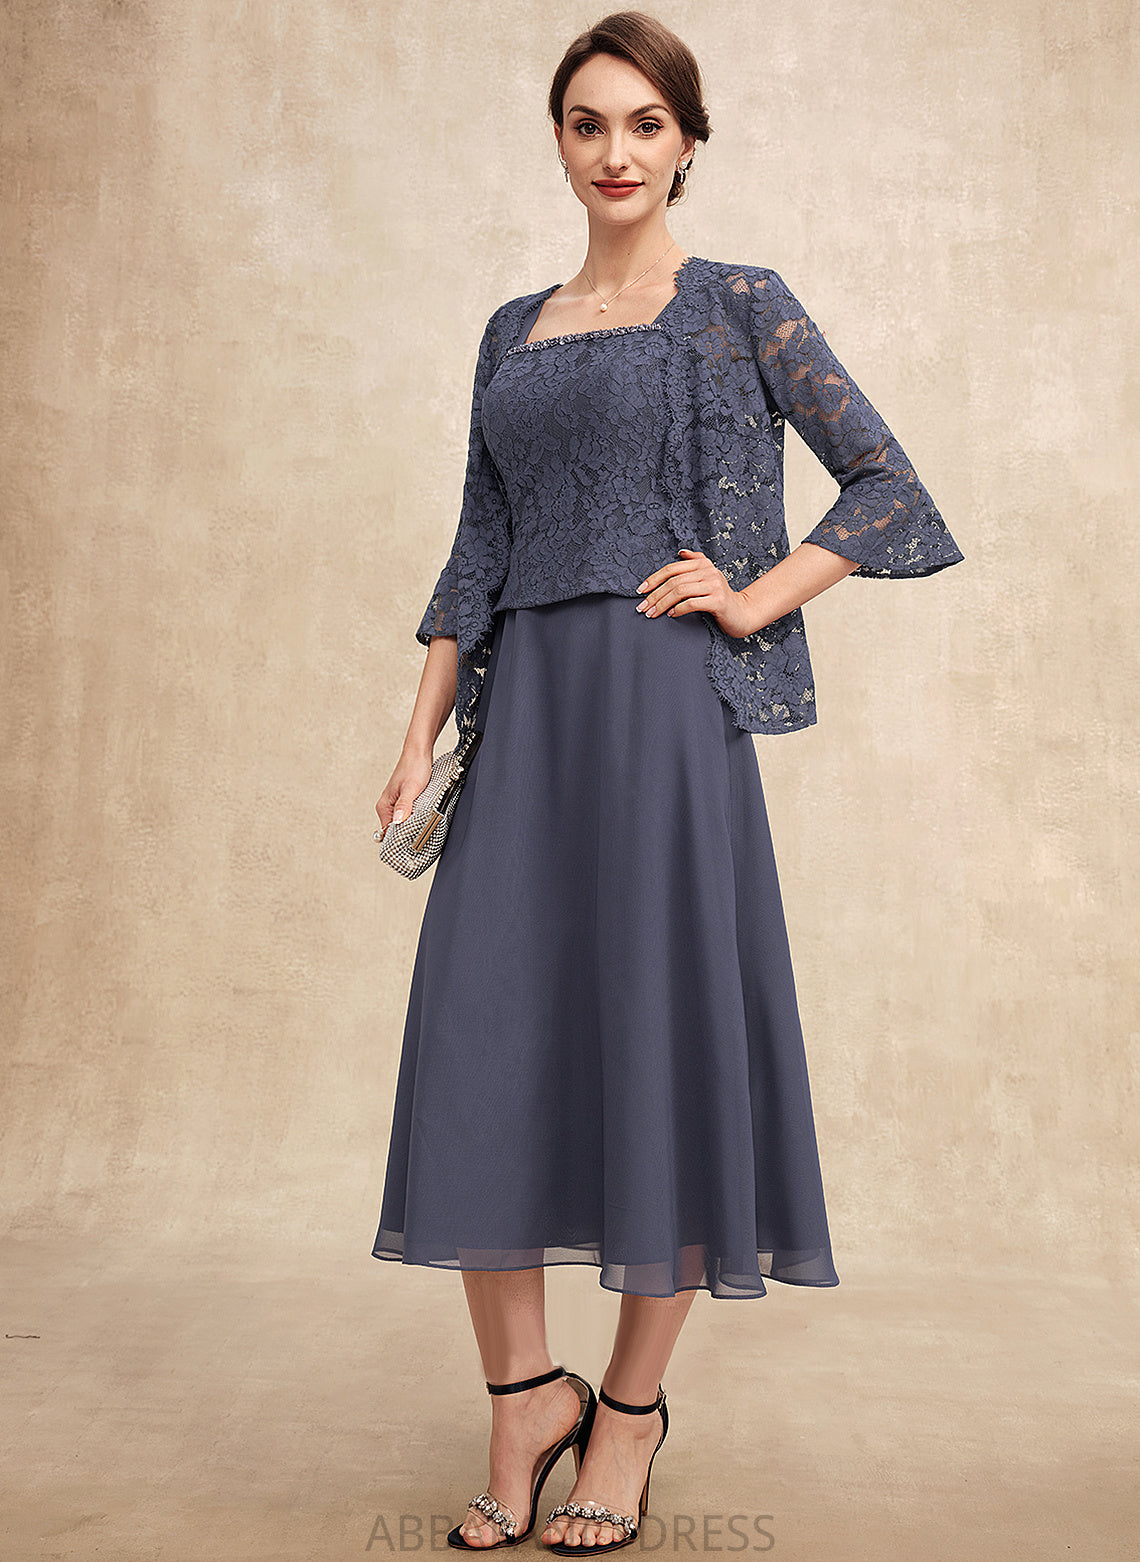 Lace A-Line Mother of the Bride Dresses Neckline Tea-Length Karlee Square the Bride Dress Beading Mother of With Chiffon